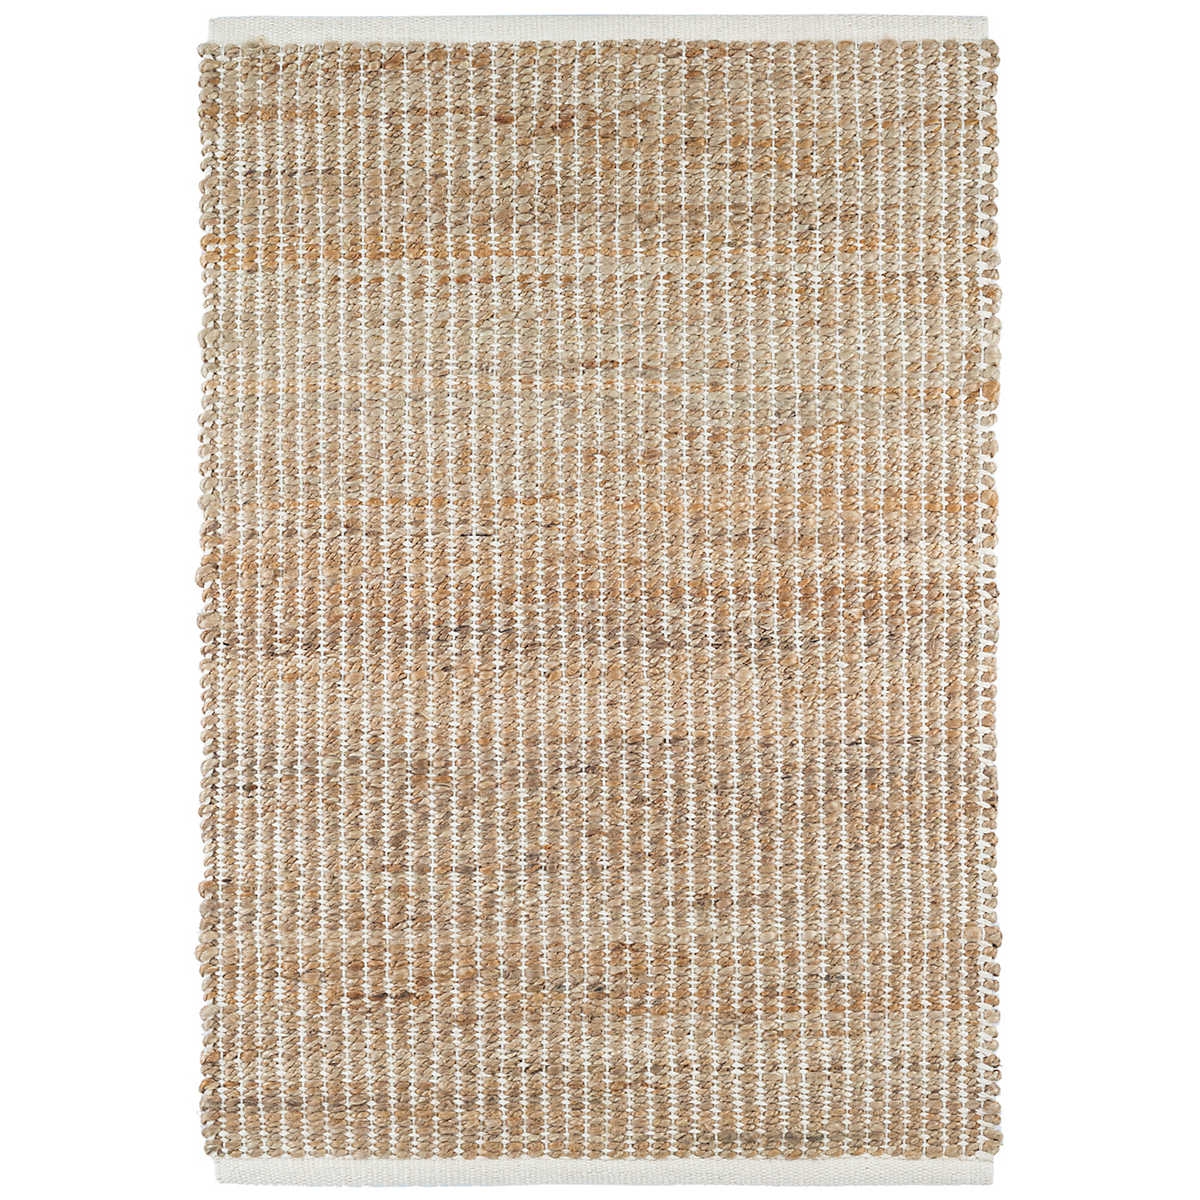 GRIDWORK IVORY WOVEN JUTE RUG - 8'x10' - Image 0